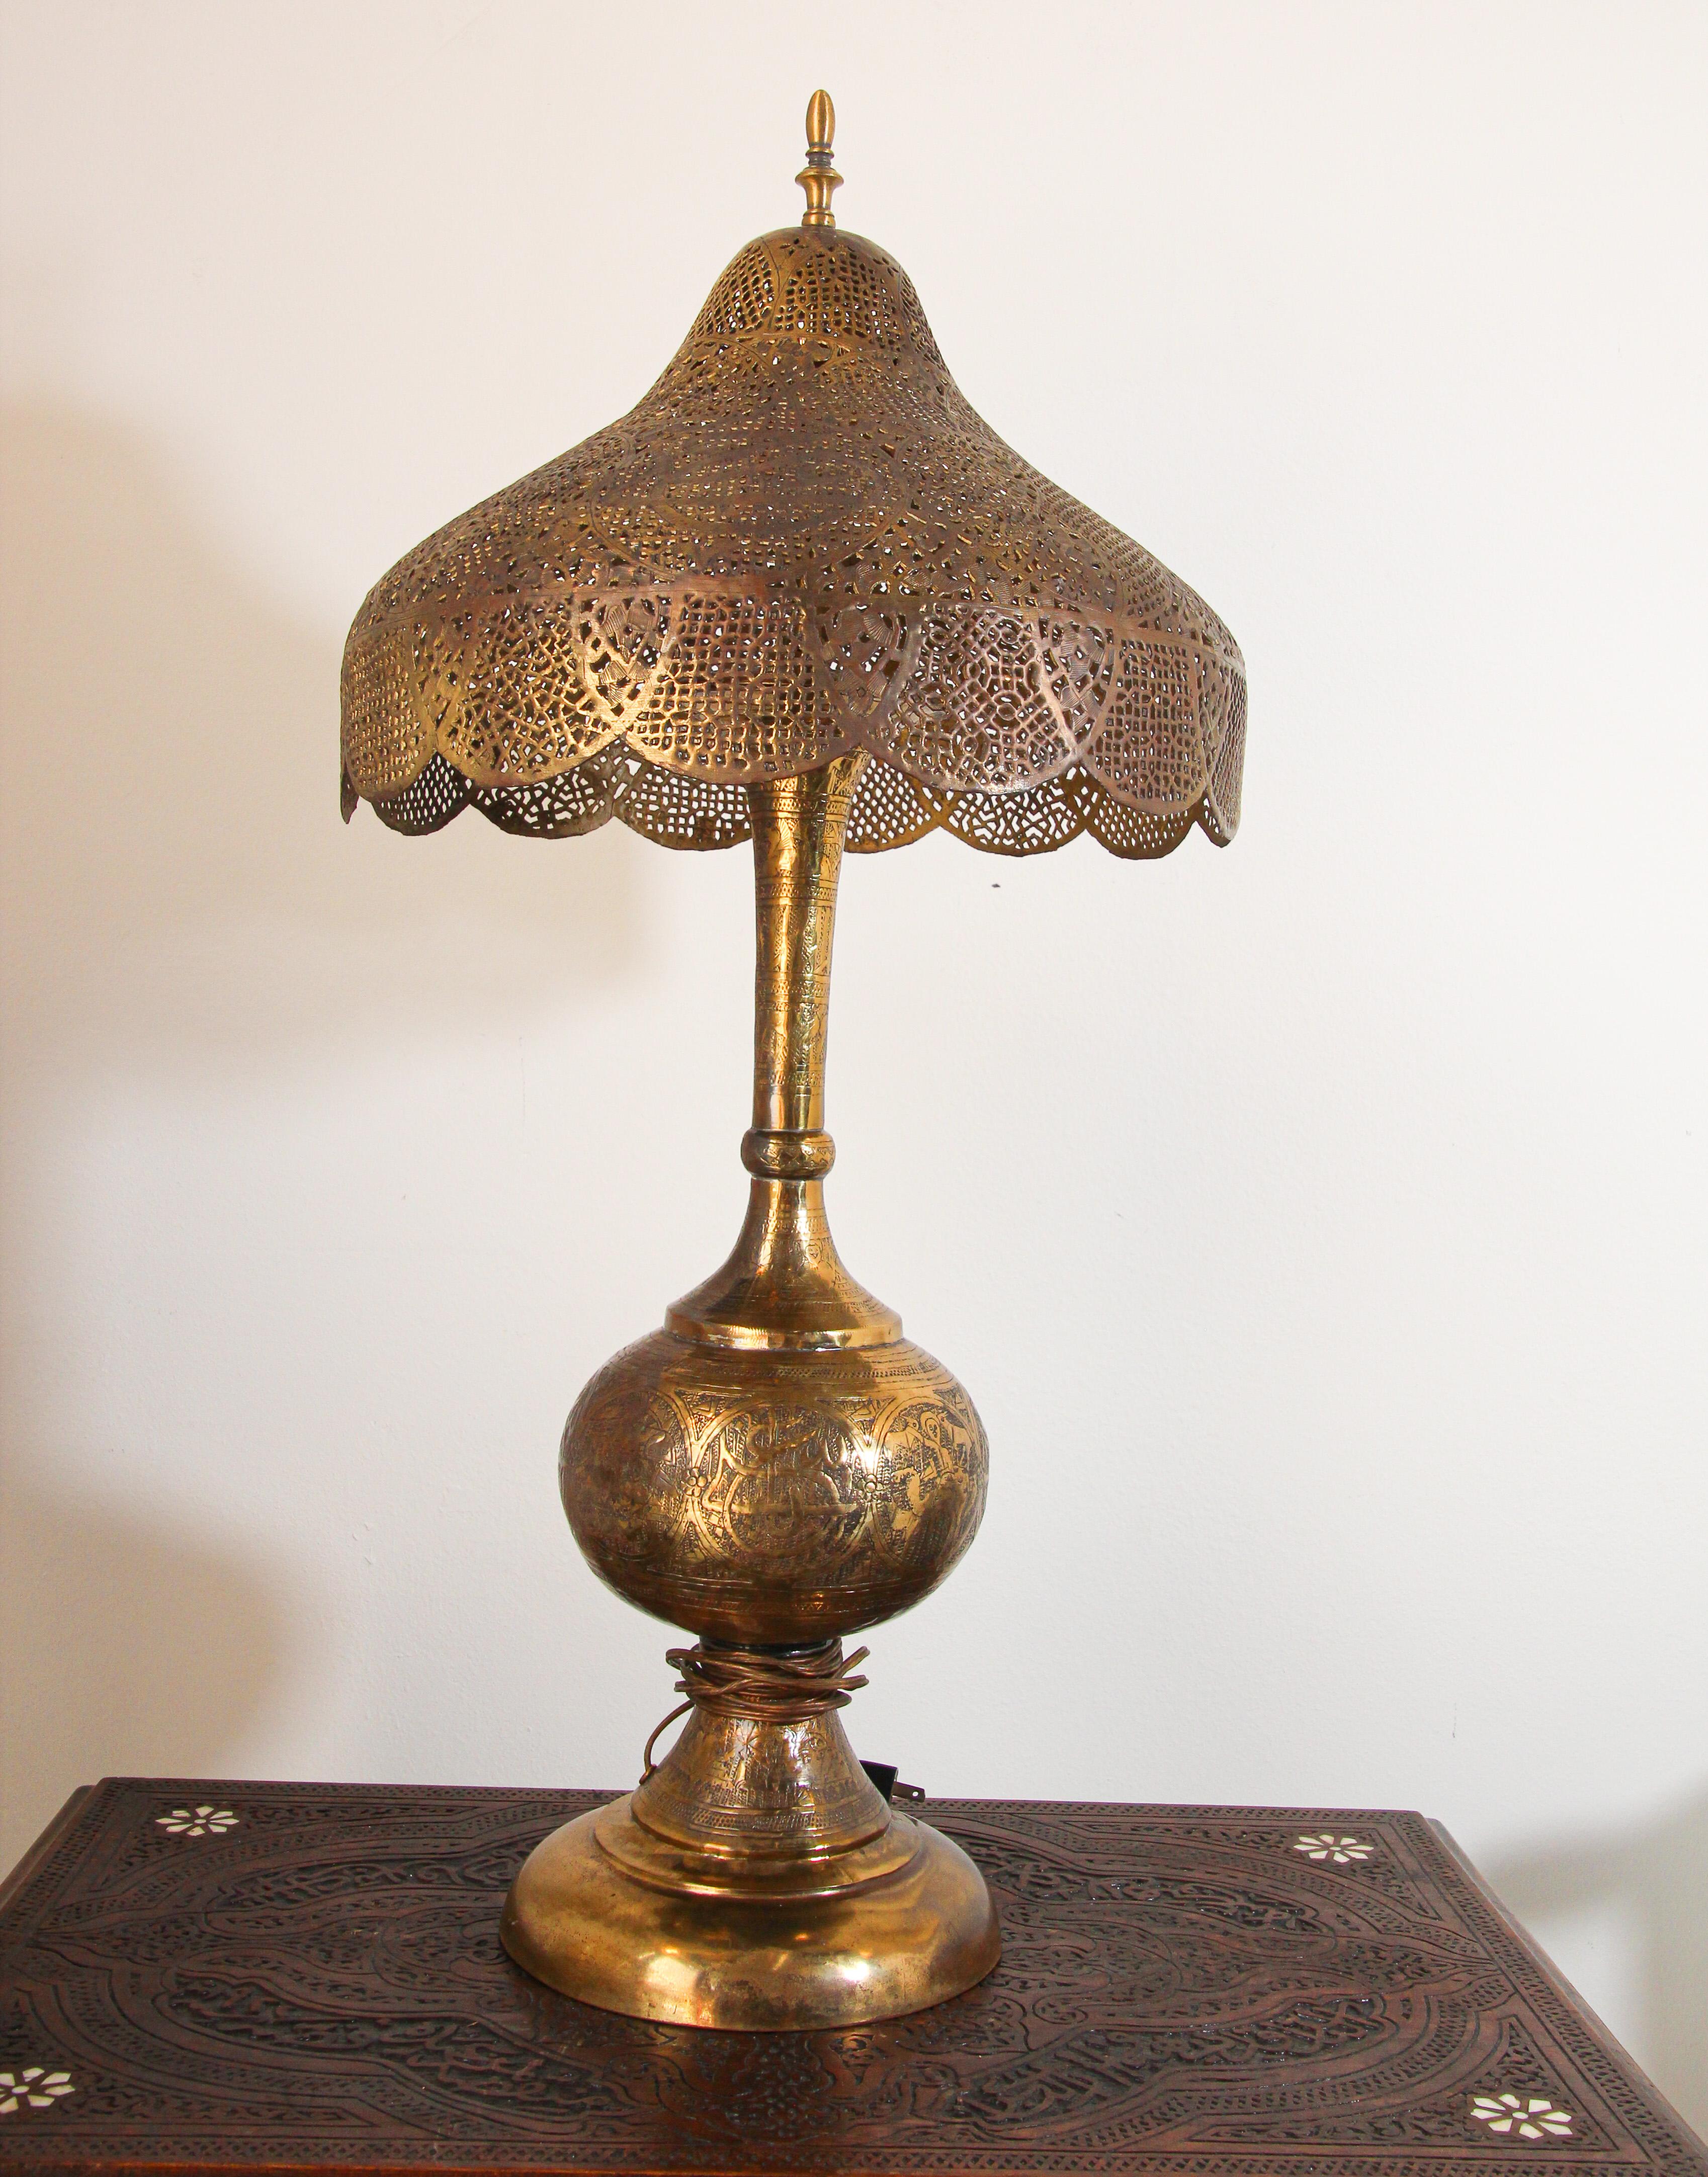 Antique fine Middle Eastern Moorish revival brass table lamp with Arabic calligraphy writing.
Moorish, Syrian style brass table lamp with hammered brass with fine Islamic designs and Egyptian figure and animals. Hand-cut filigree shade.
Brass